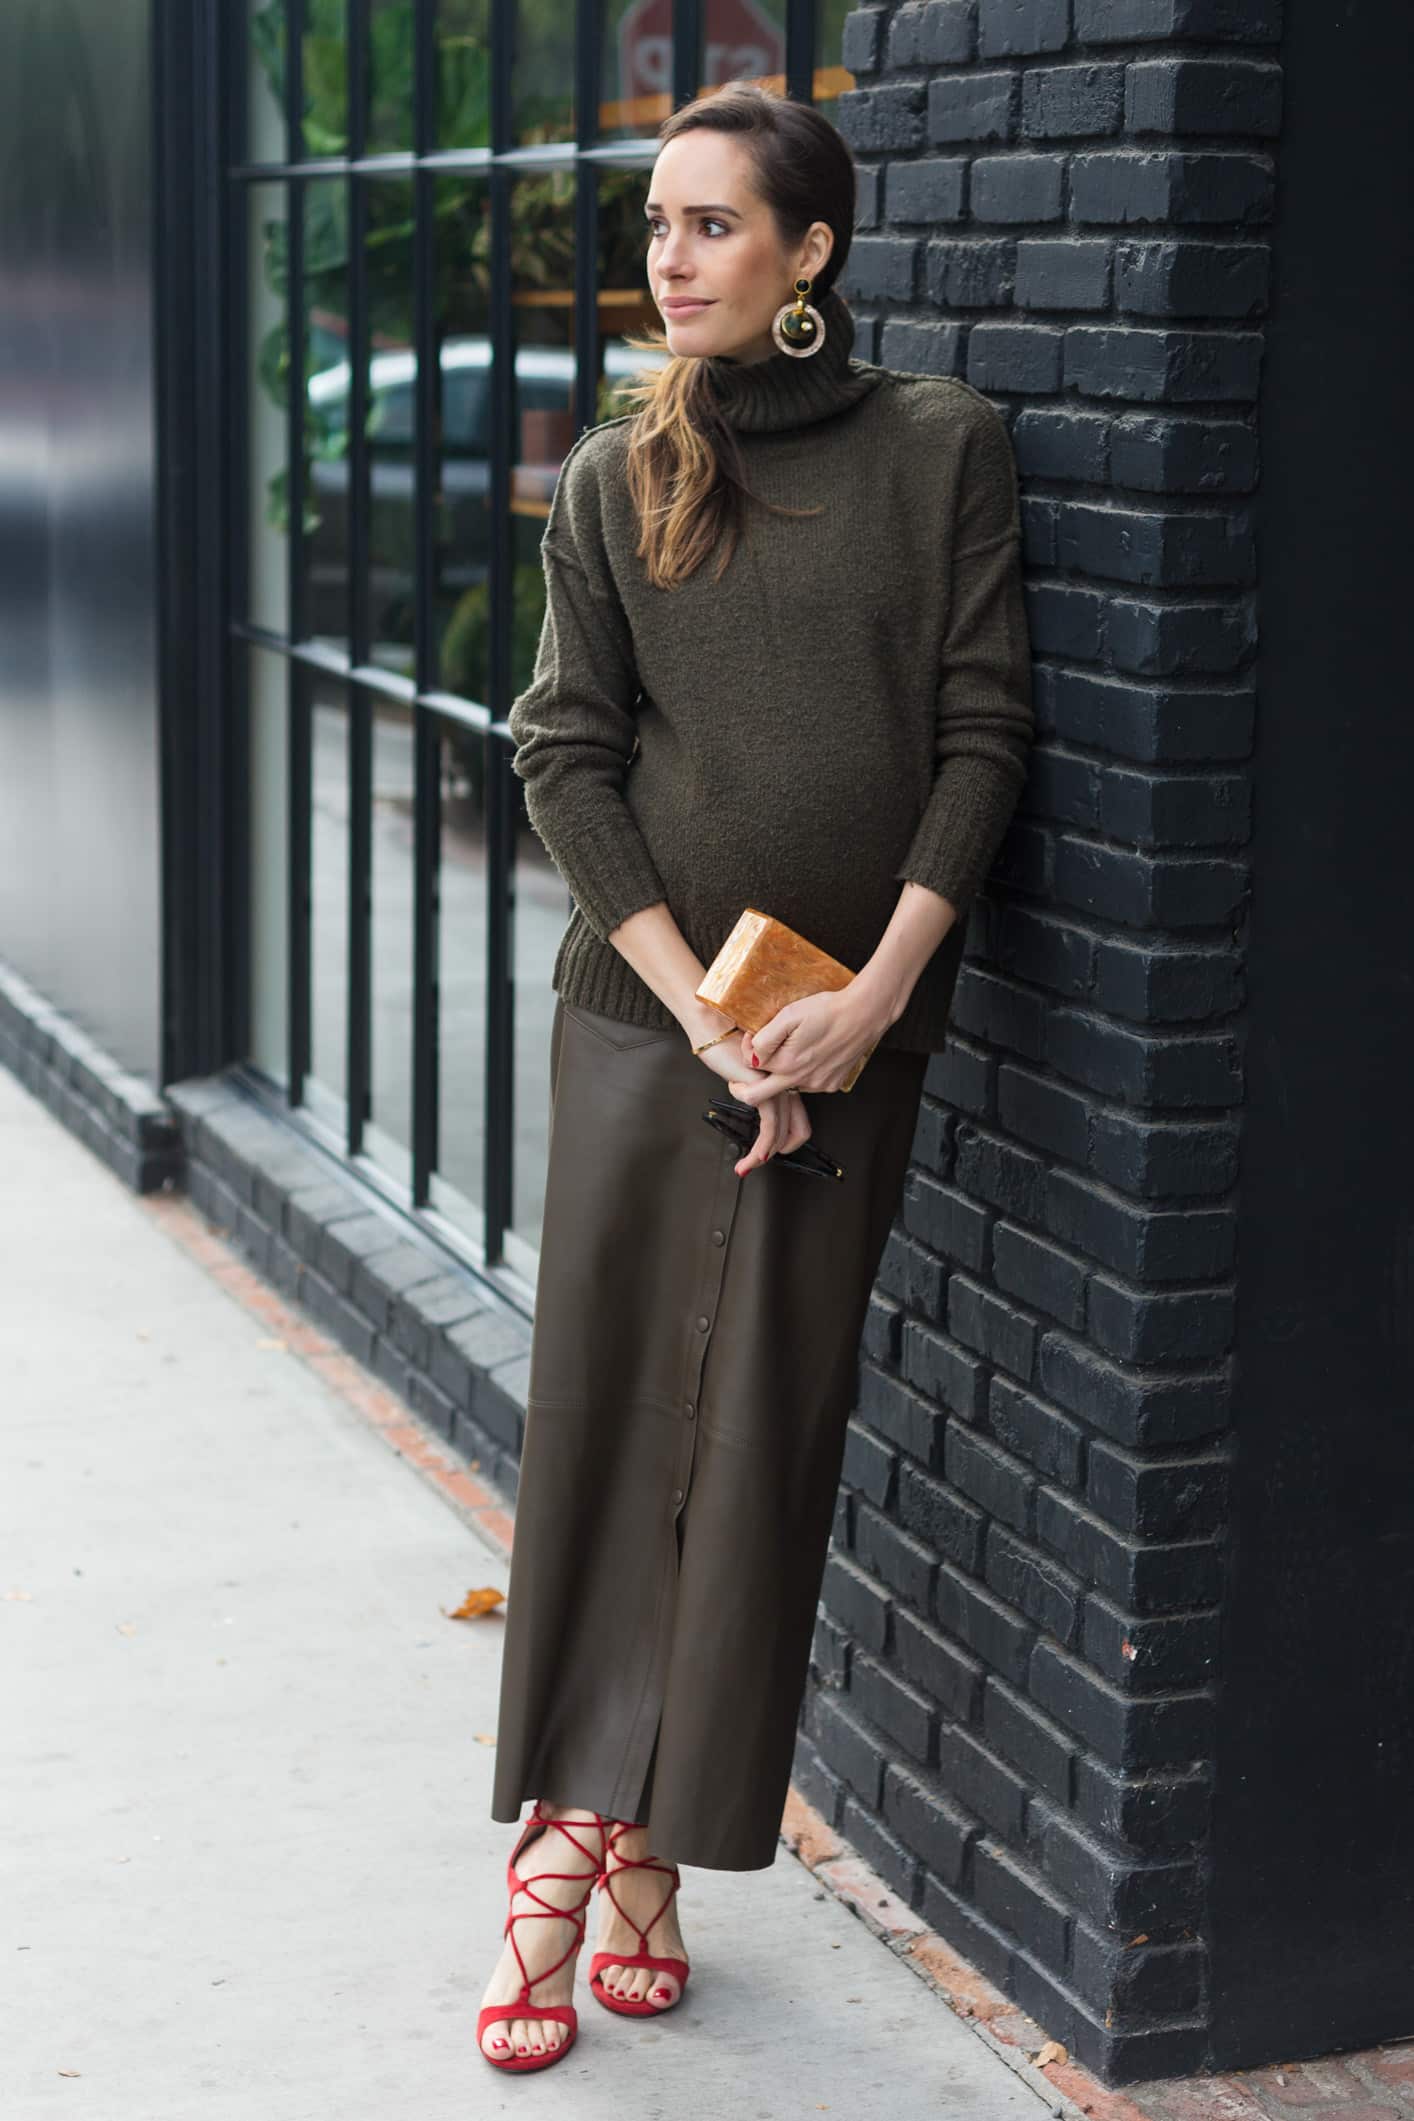 Louise Roe wearing a monochrome olive outfit with turtleneck leather skirt and red heels